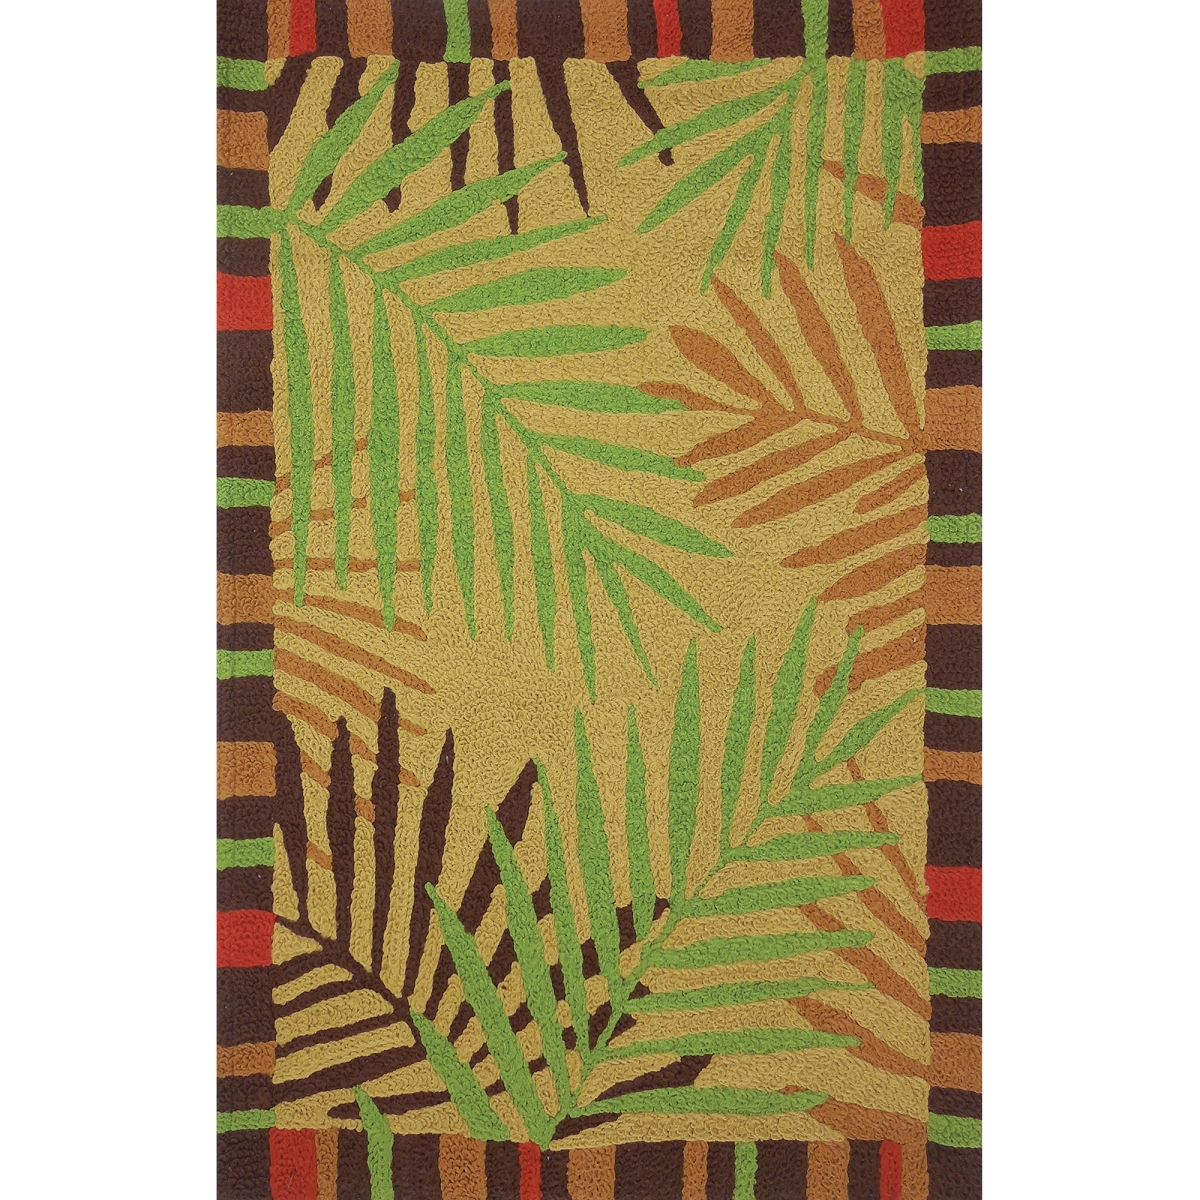 Jio-jcc001e 58 X 78 In. Tropical Leaves Indoor & Outdoor Area Rug